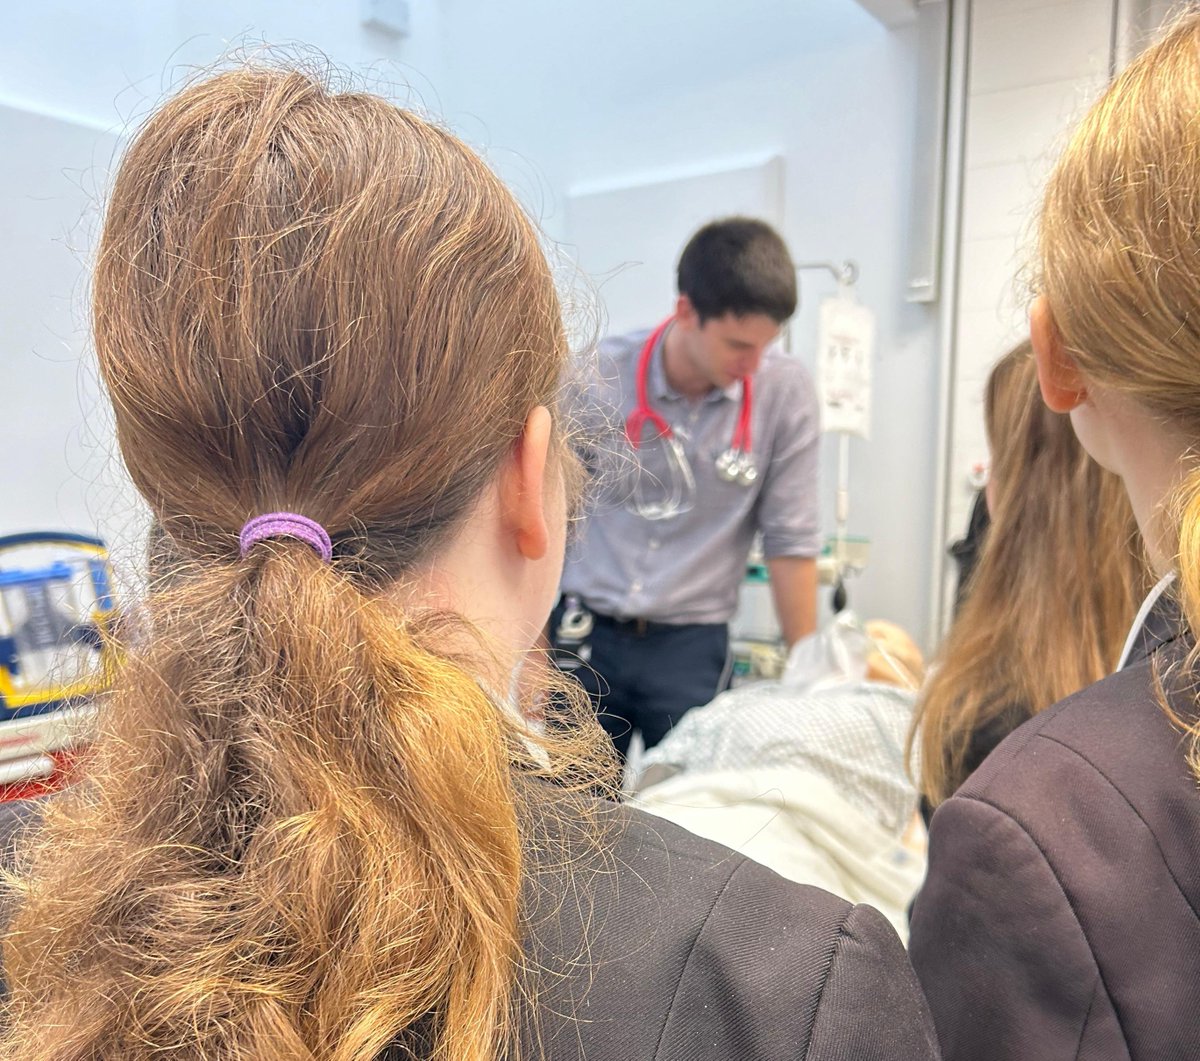 Thinking of a career in healthcare? Work experience is a great way to get an insight into a career, and gain confidence and experience working in a team. We're taking applications for work experience from those aged 16+ for the summer. Find out more: ow.ly/vzKO50R15B8